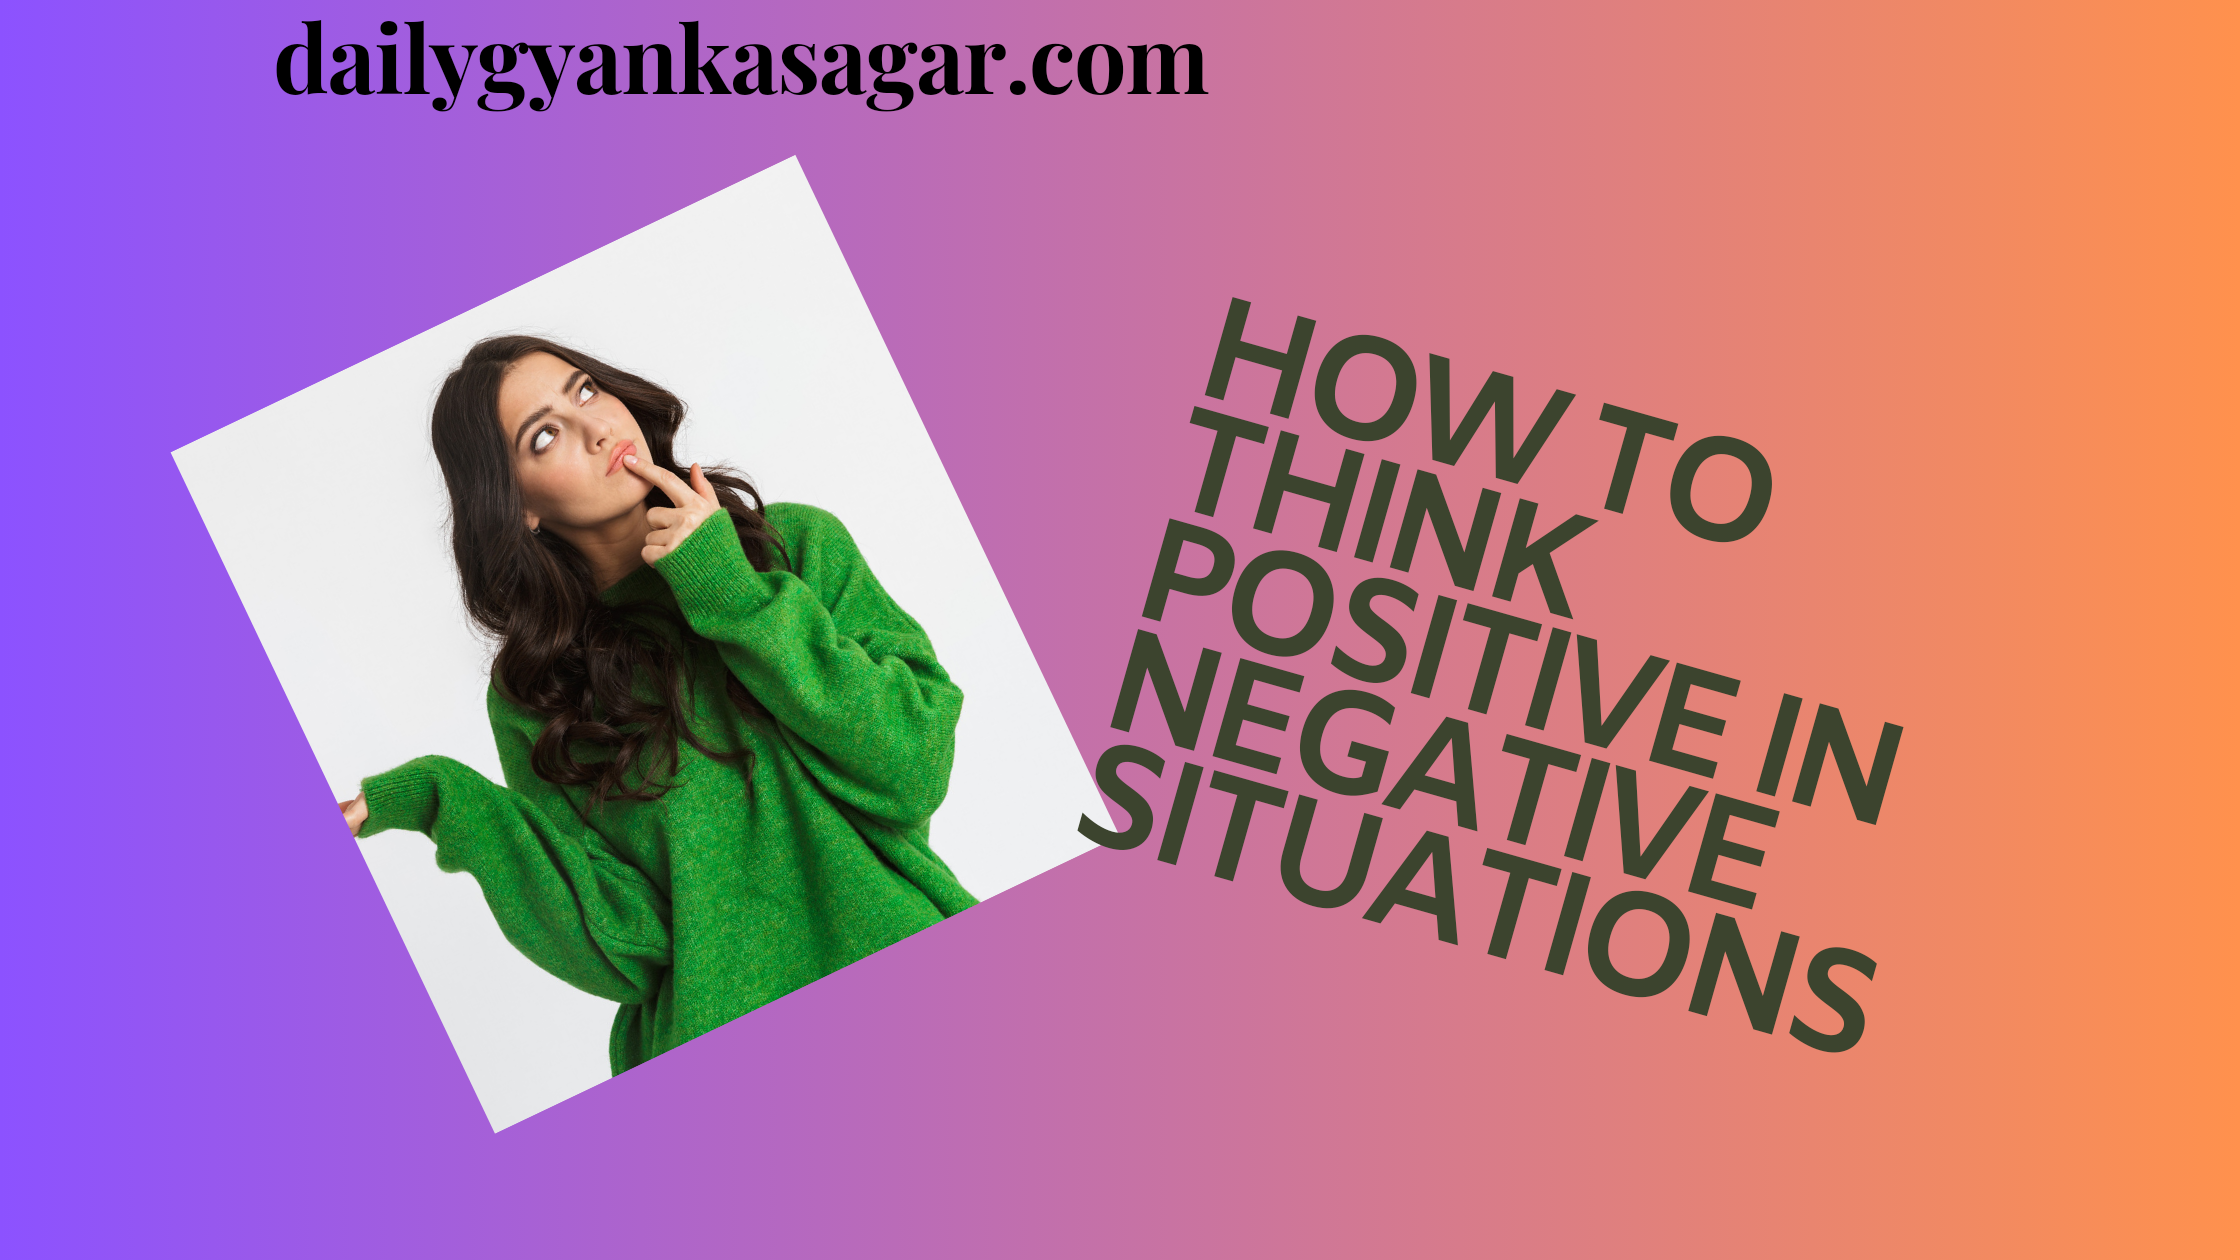 How to think positive in negative situations